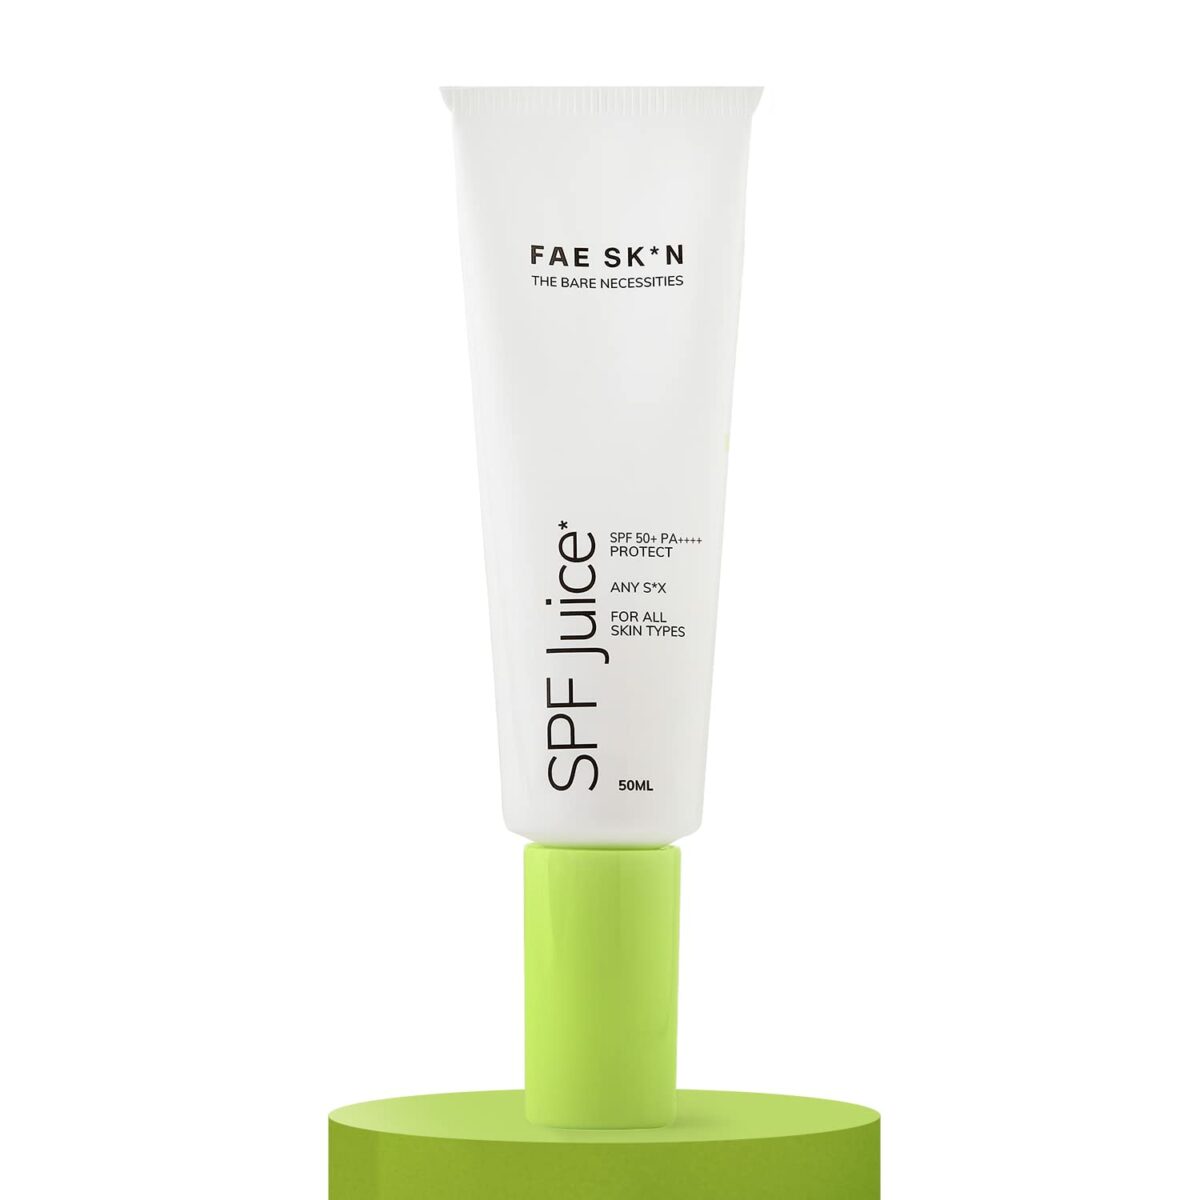 FAE Beauty No White Cast Lightweight Sunscreen With SPF 50+ PA++++ | Fragrance Free, Natural Finish | Non Greasy, Broad Spectrum SPF Juice | Hydrates Skin | For All Skin Types | Vegan (50ml)